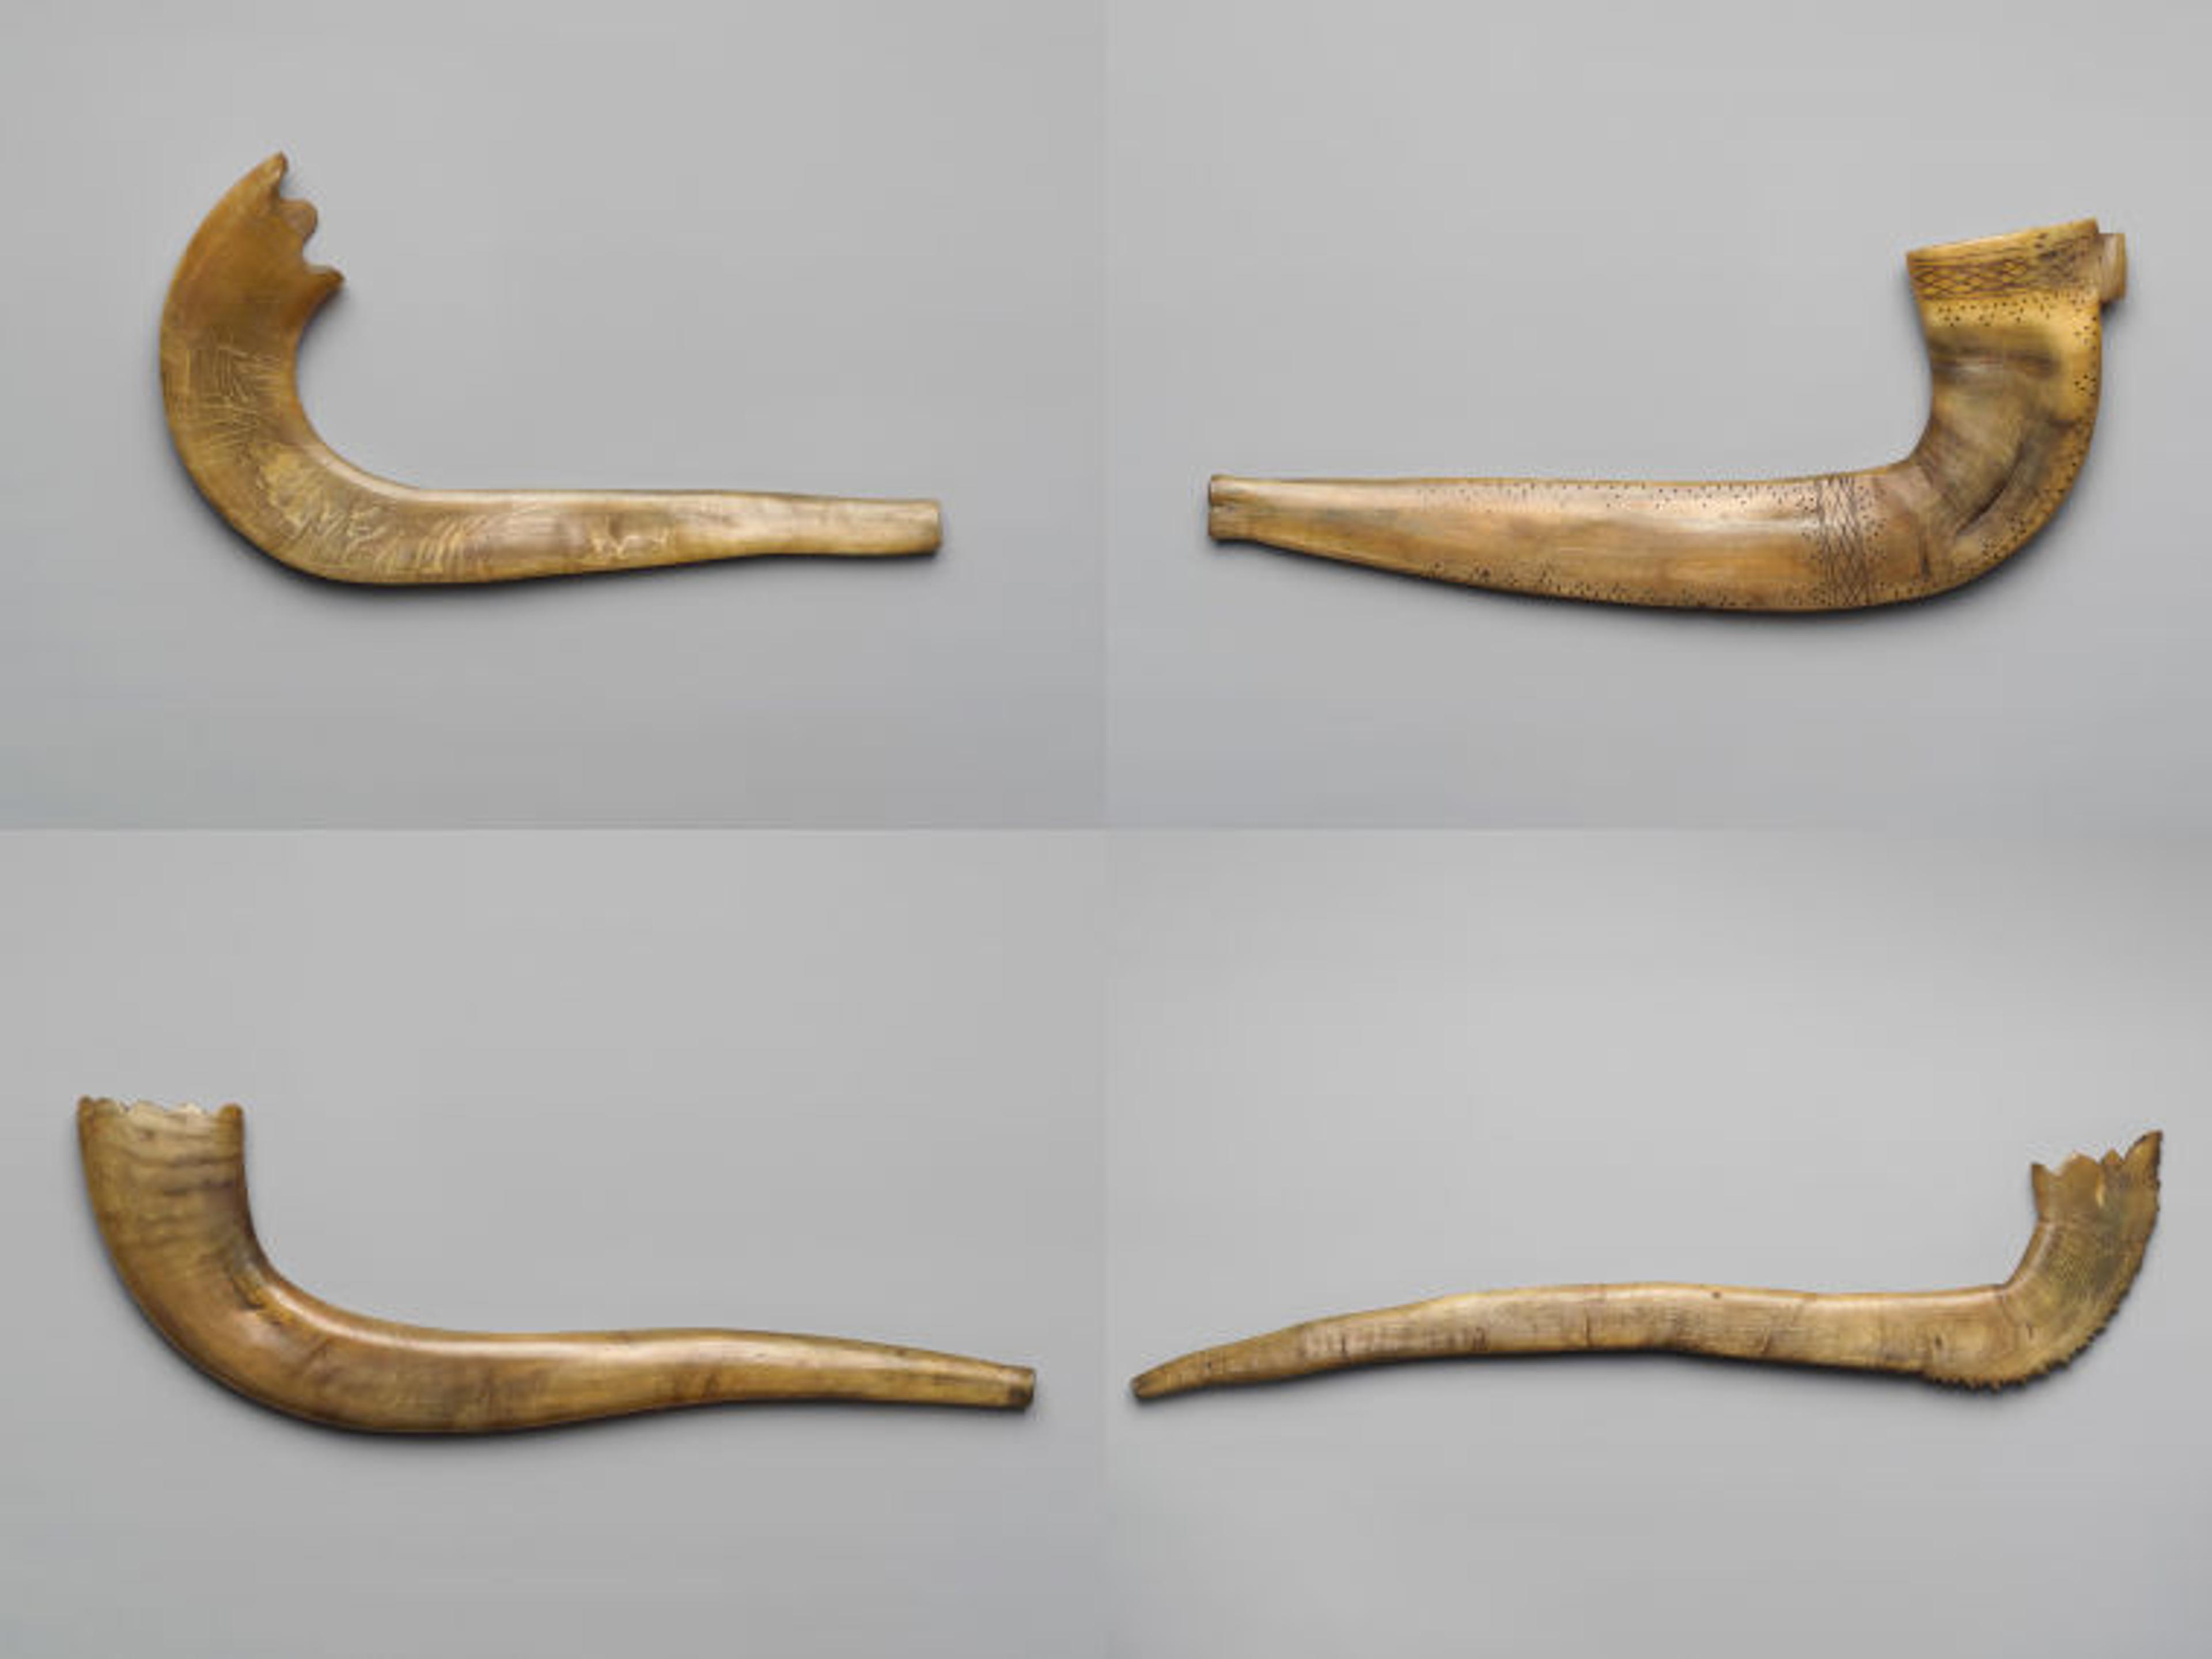 A selection of historical ram's-horn shofars from The Met collection